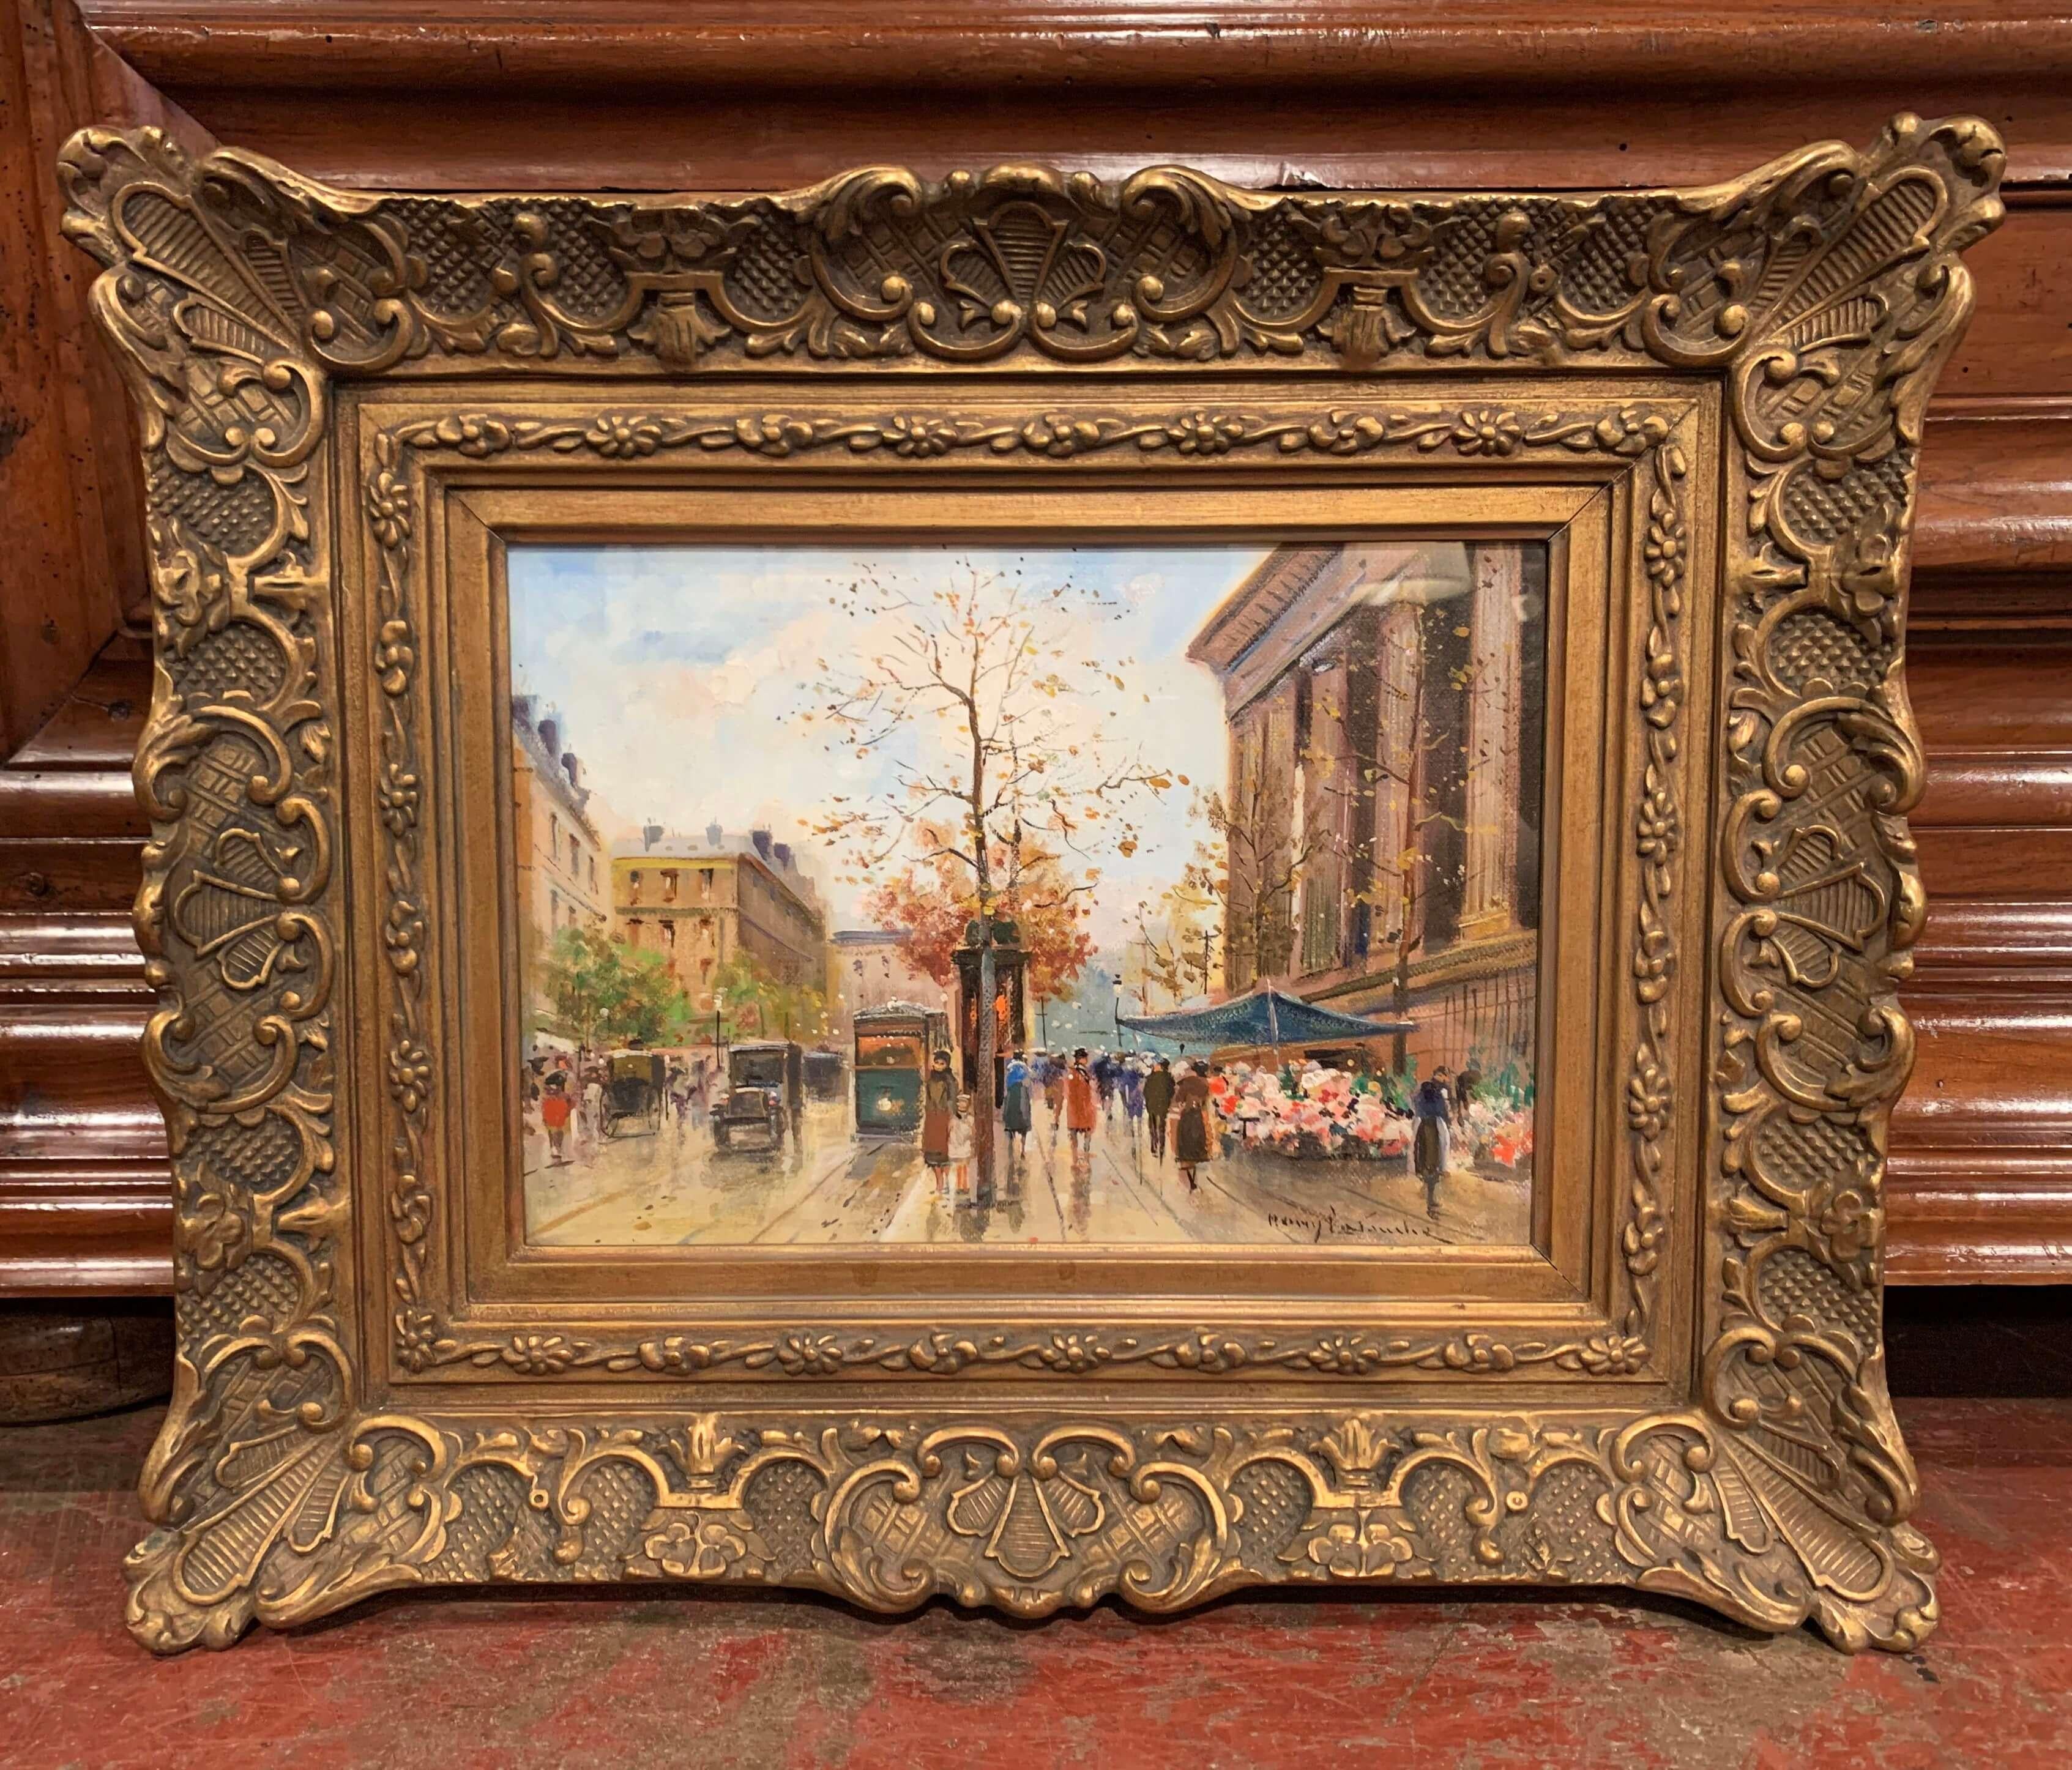 Painted in the manner of Leon Cortes or Eugene Galien Laloue, these gouache on canvas paintings were created in Paris, France, circa 1900. The highly detailed scenes are set inside carved gilt frames with a protecting glass on top. One of the